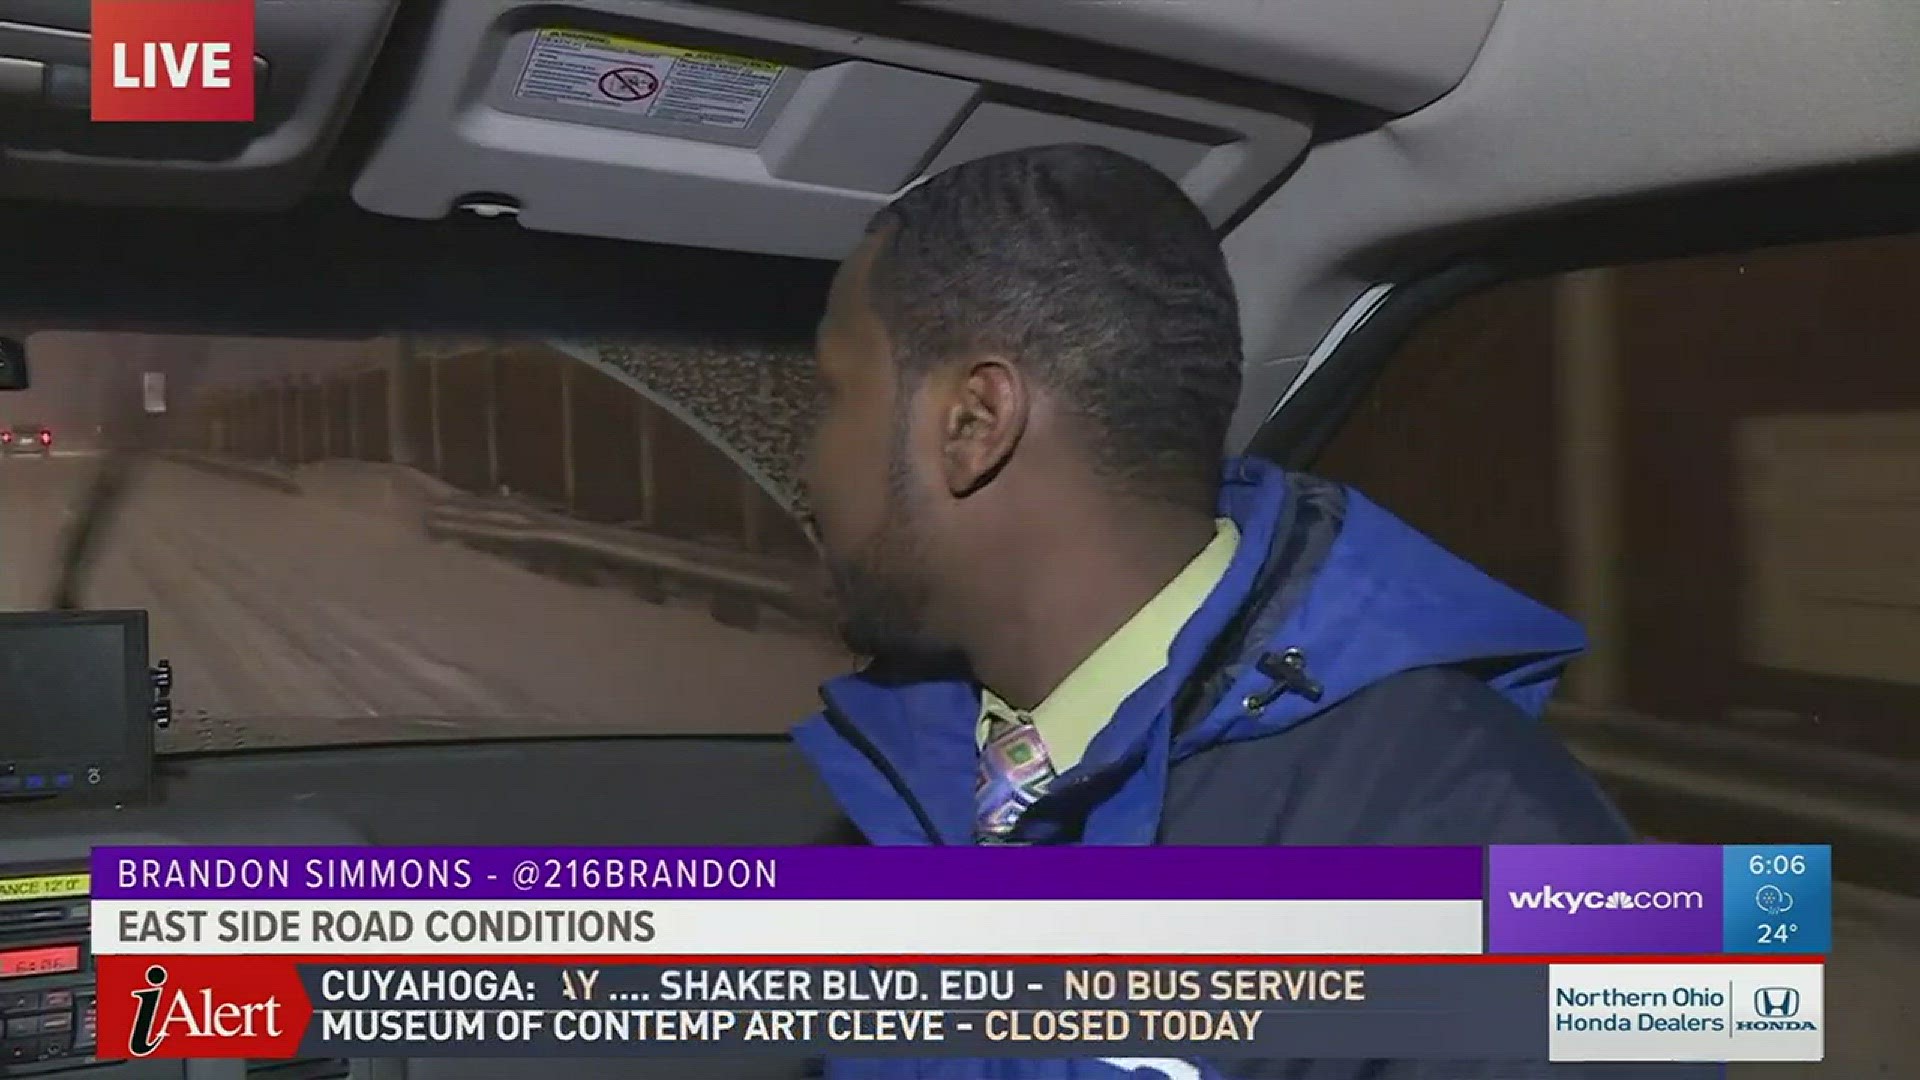 Driving conditions on Cleveland's east side with Brandon Simmons